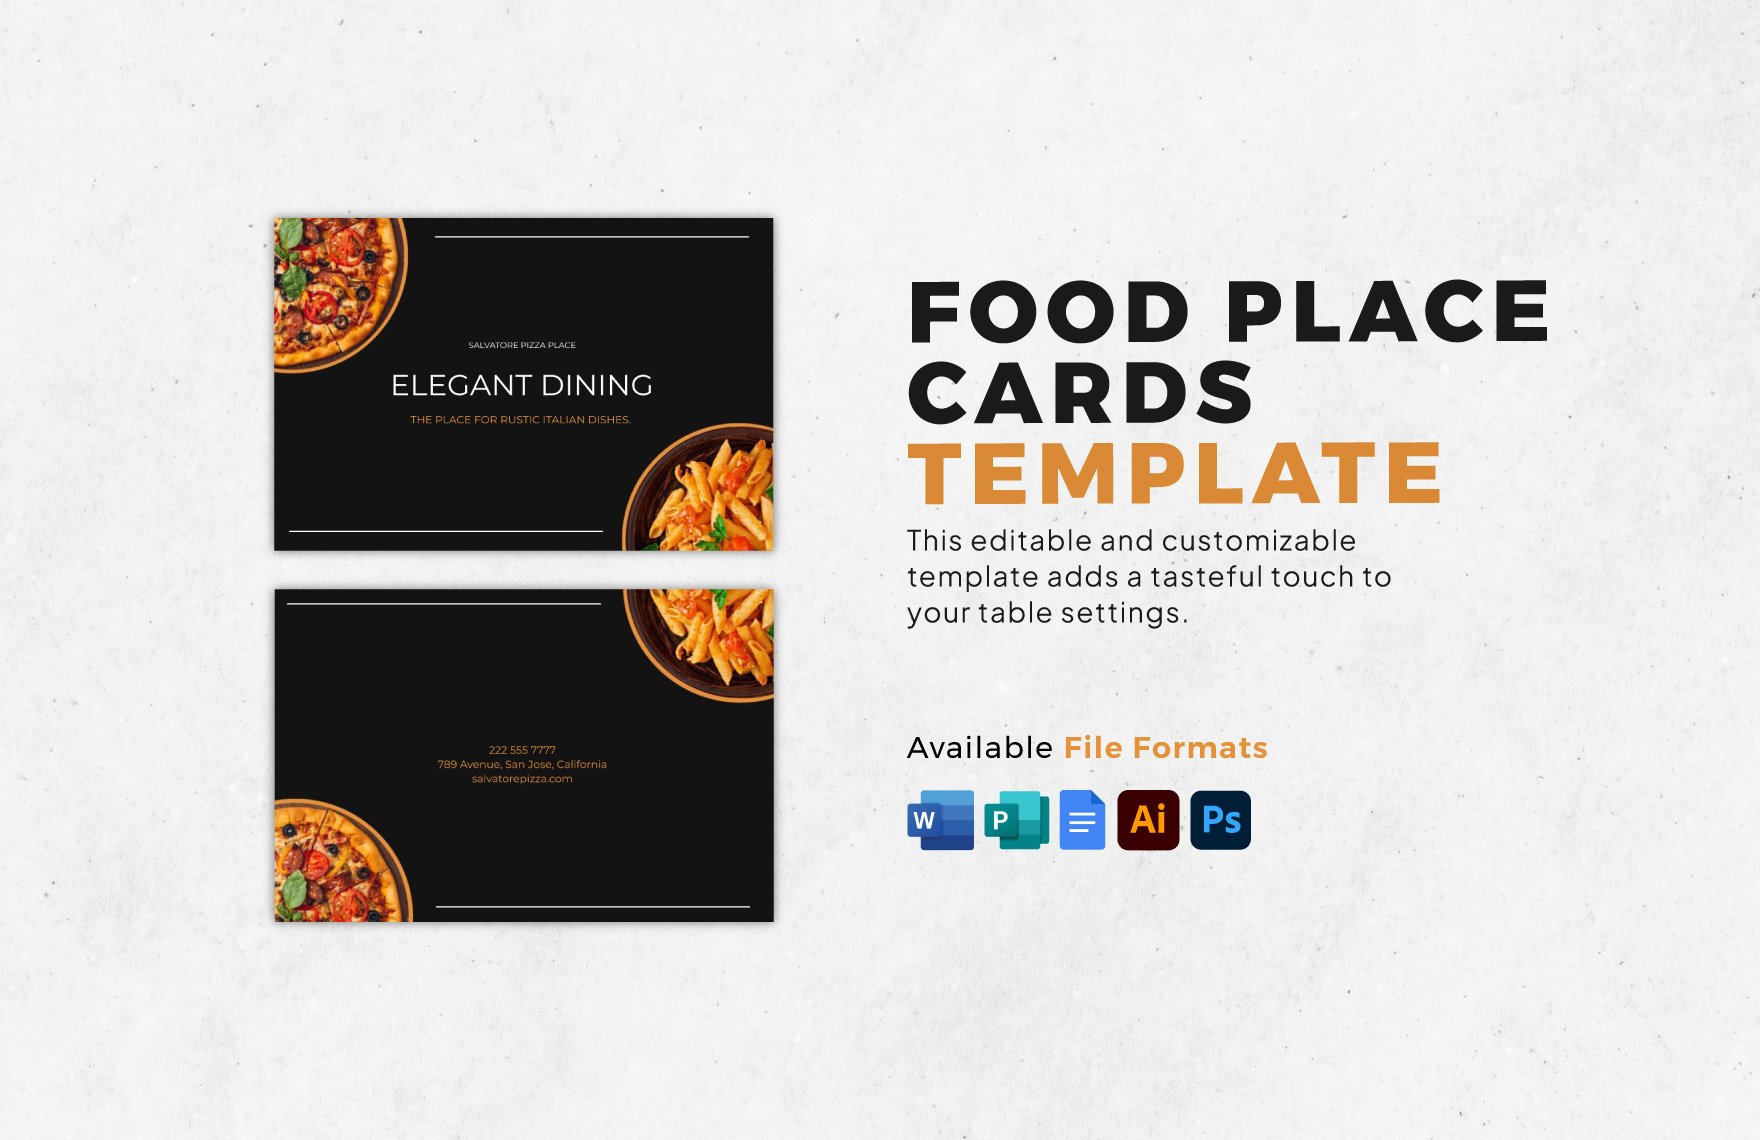 Food Place Cards Template